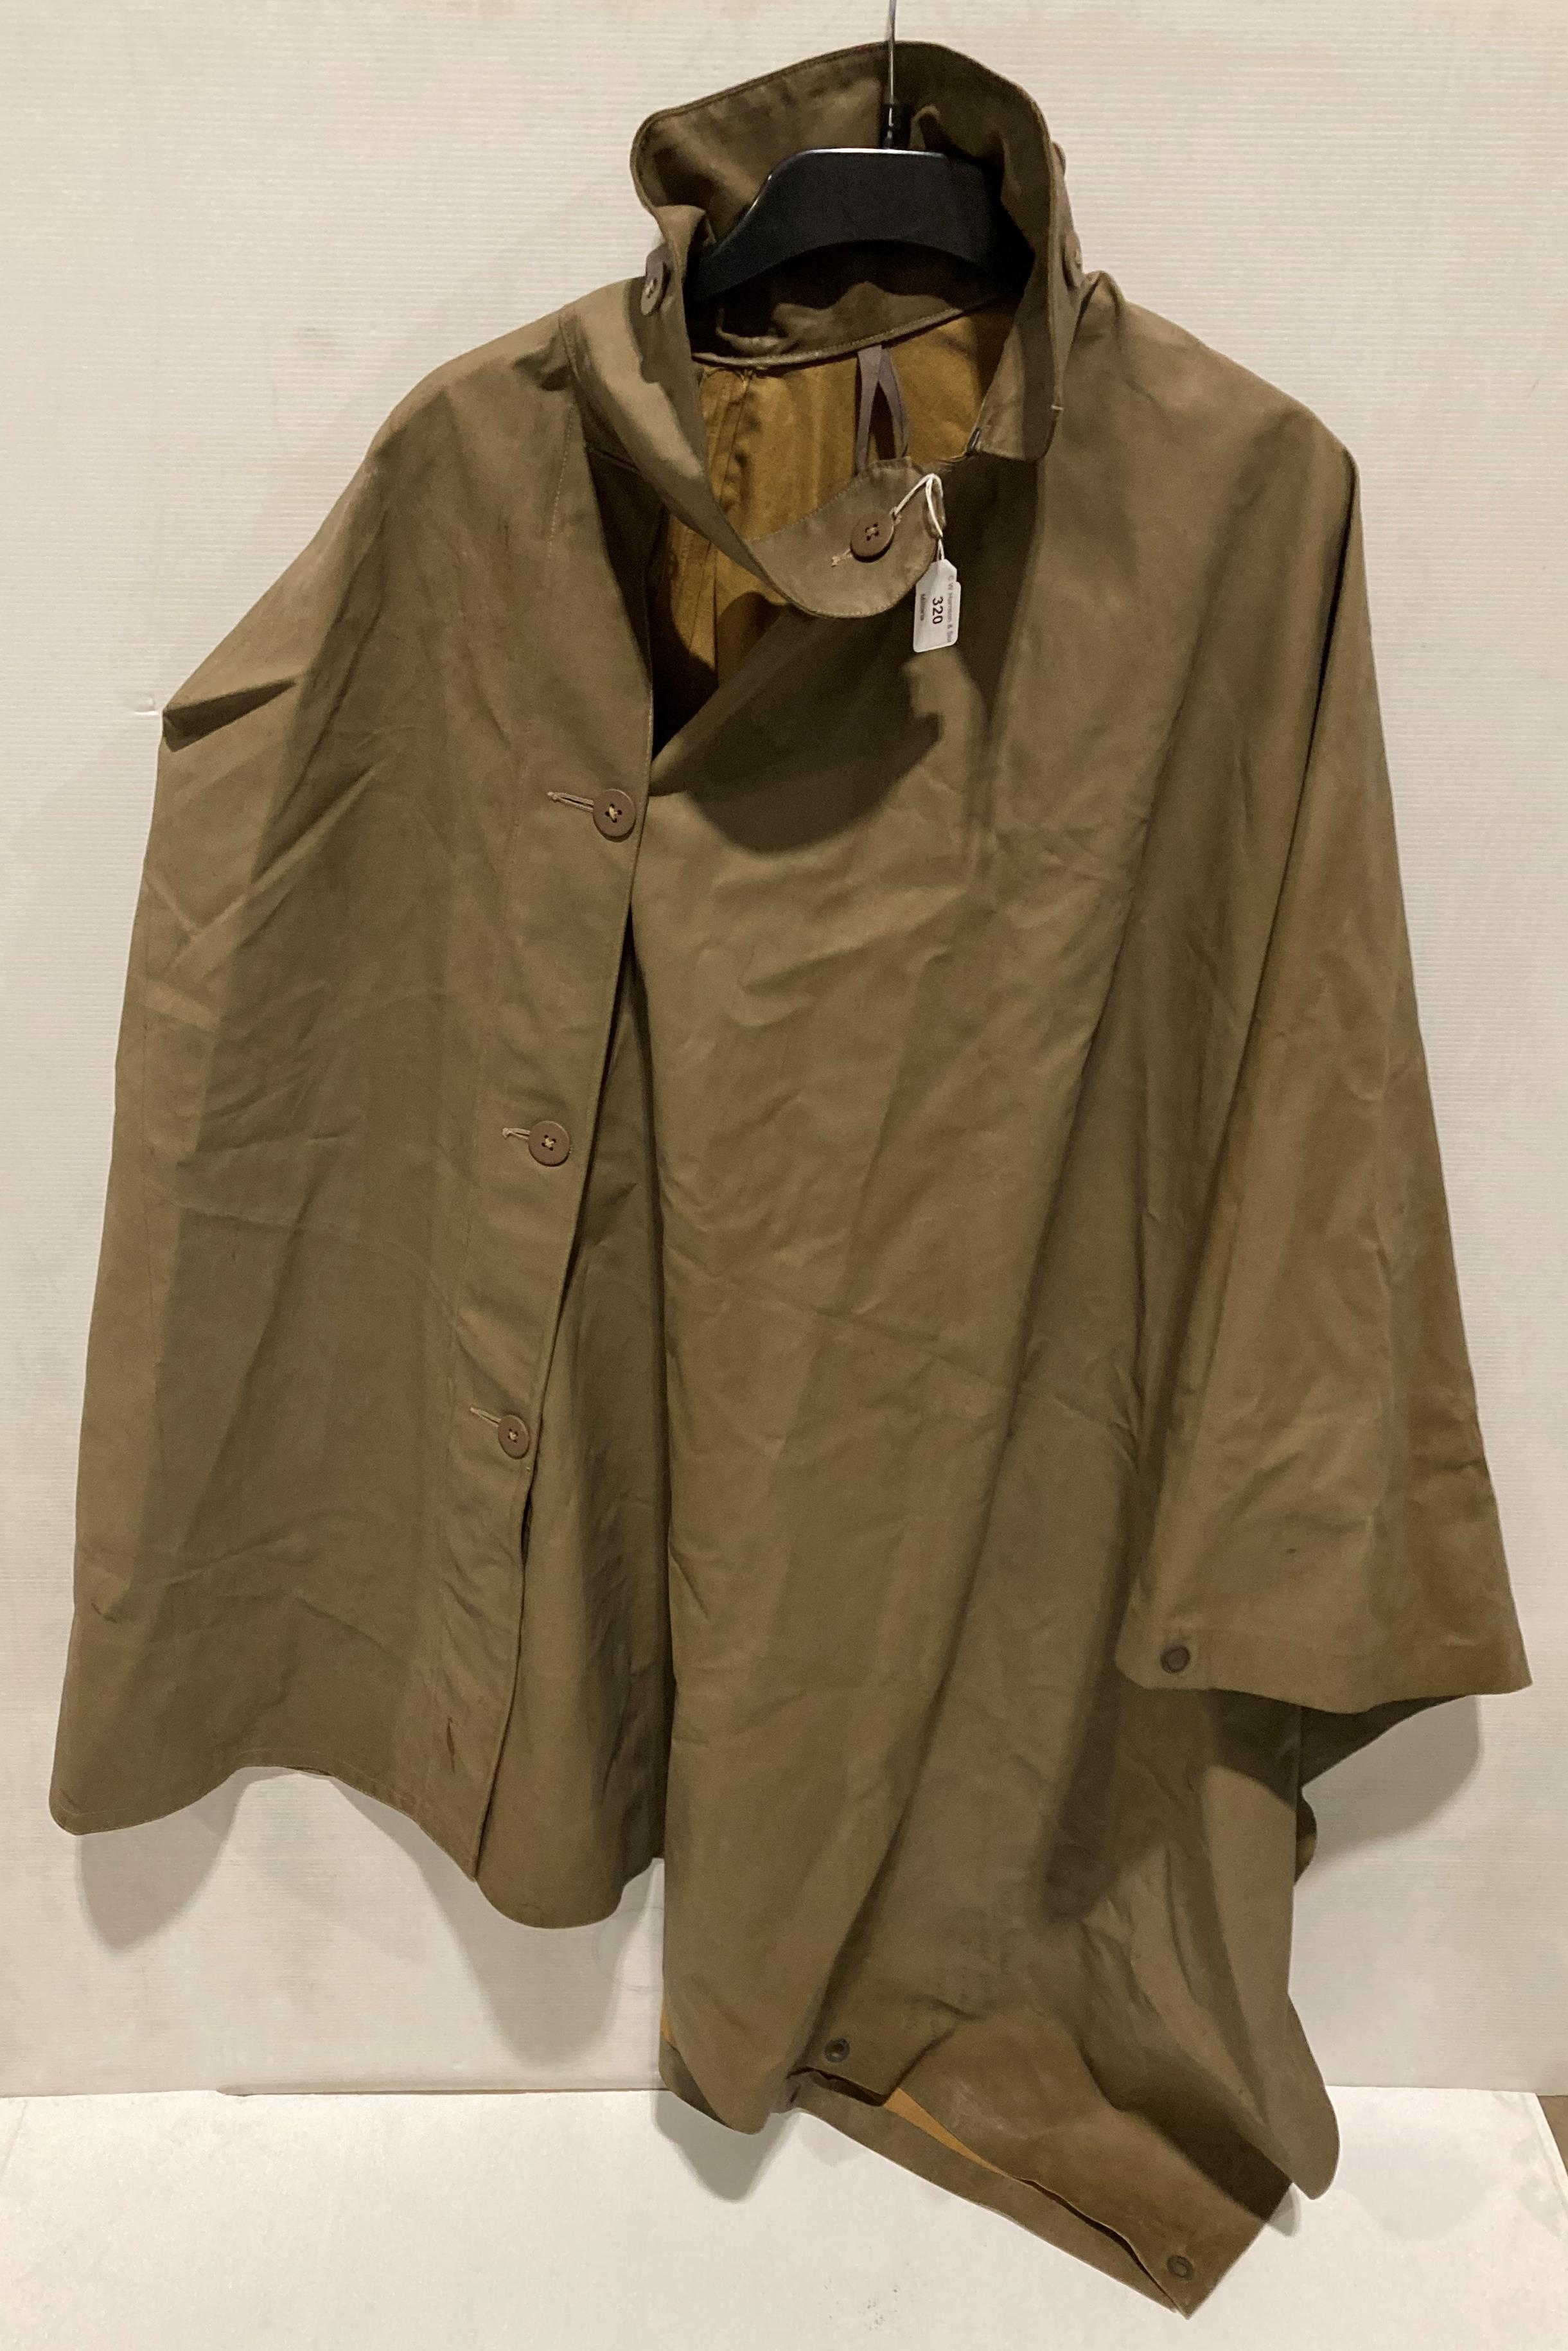 Military 1940 brown trench/waterproof cape by J Weinberg & Sons Ltd,